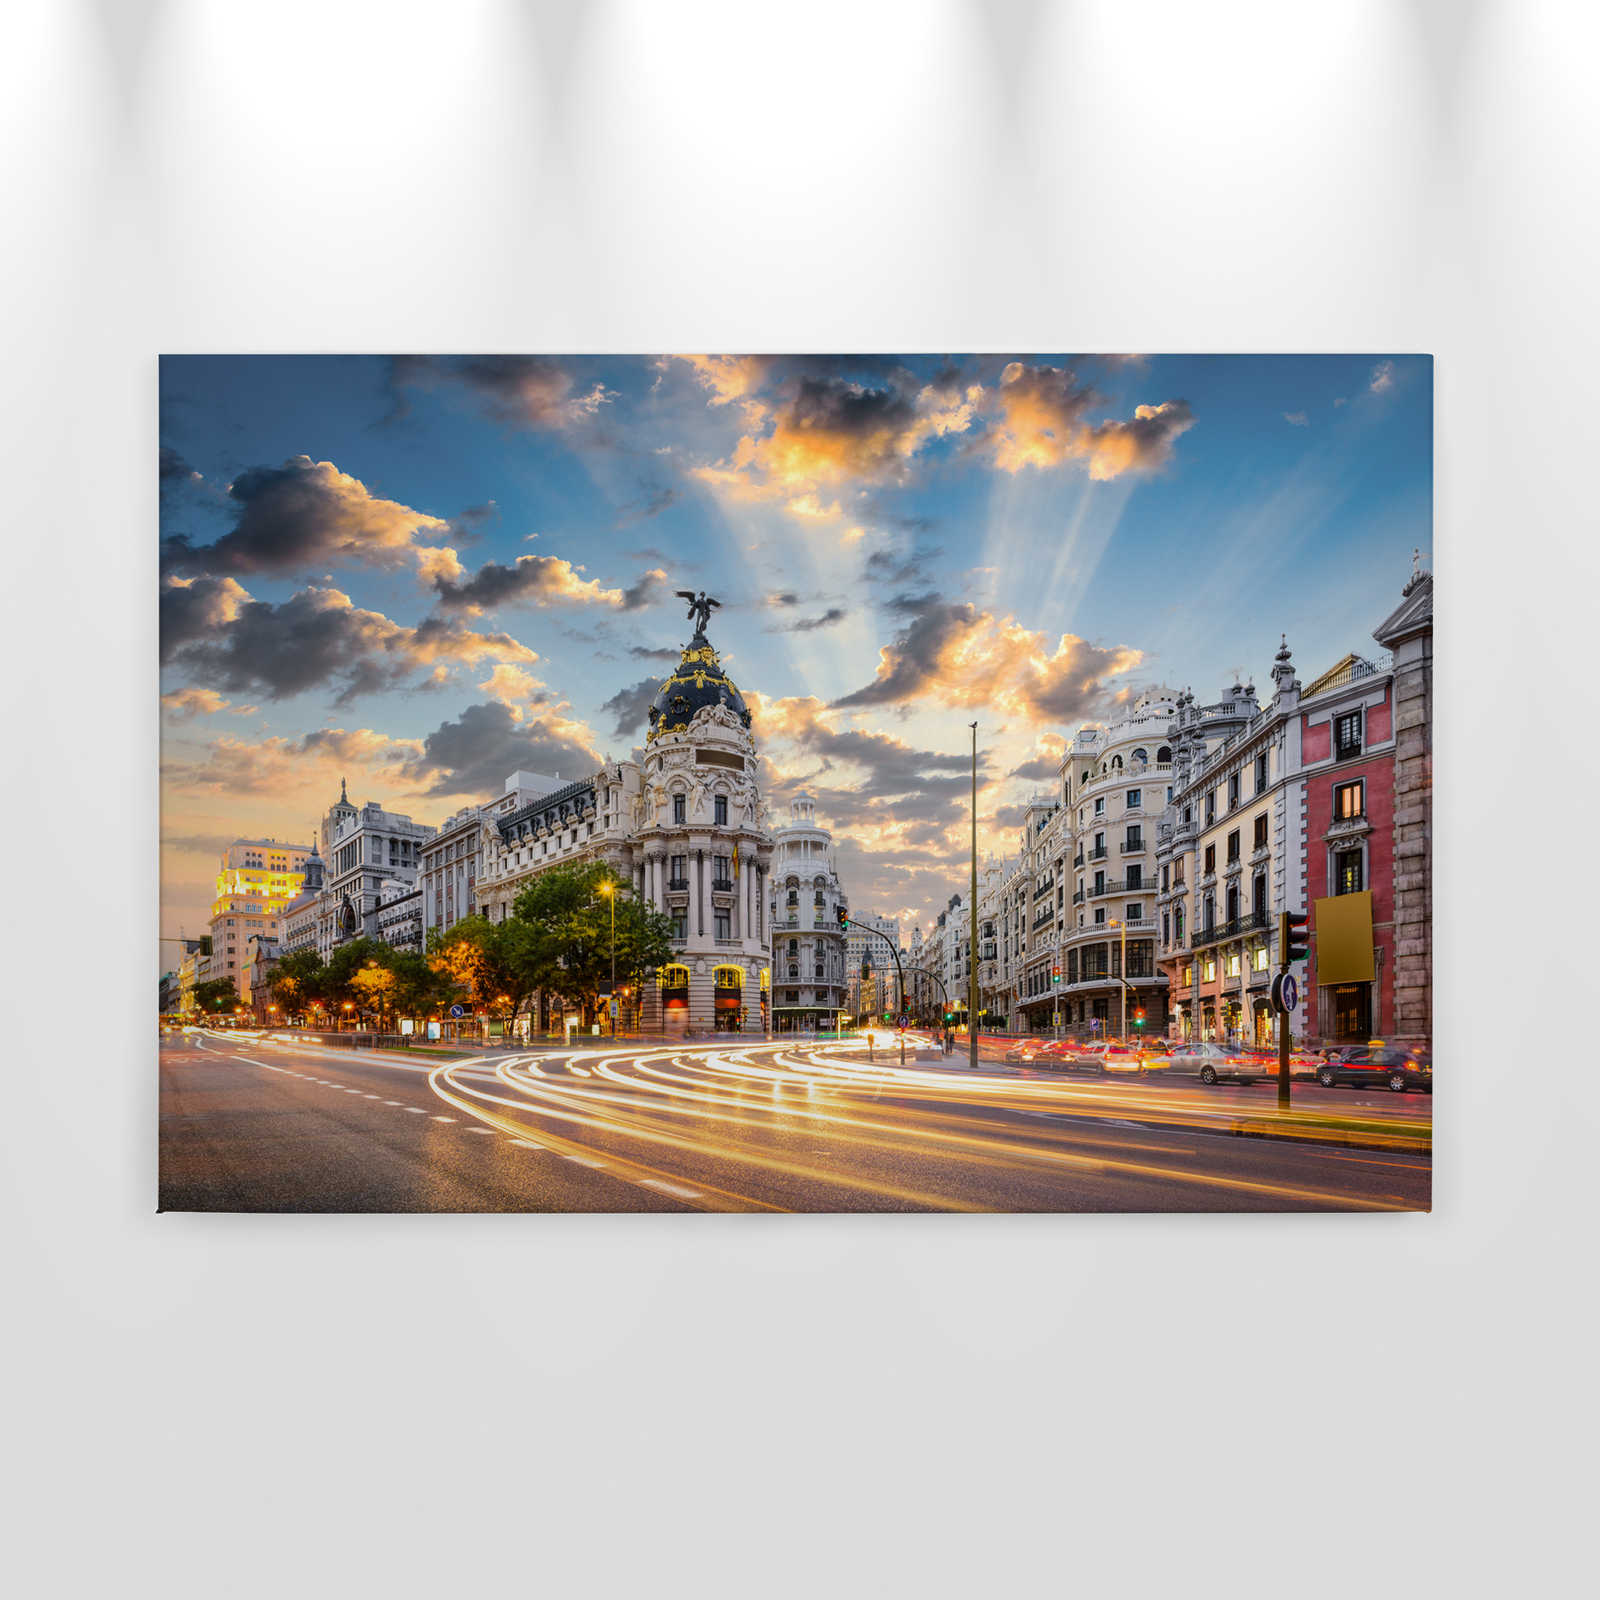             Canvas with Madrid's streets in the morning - 0.90 m x 0.60 m
        